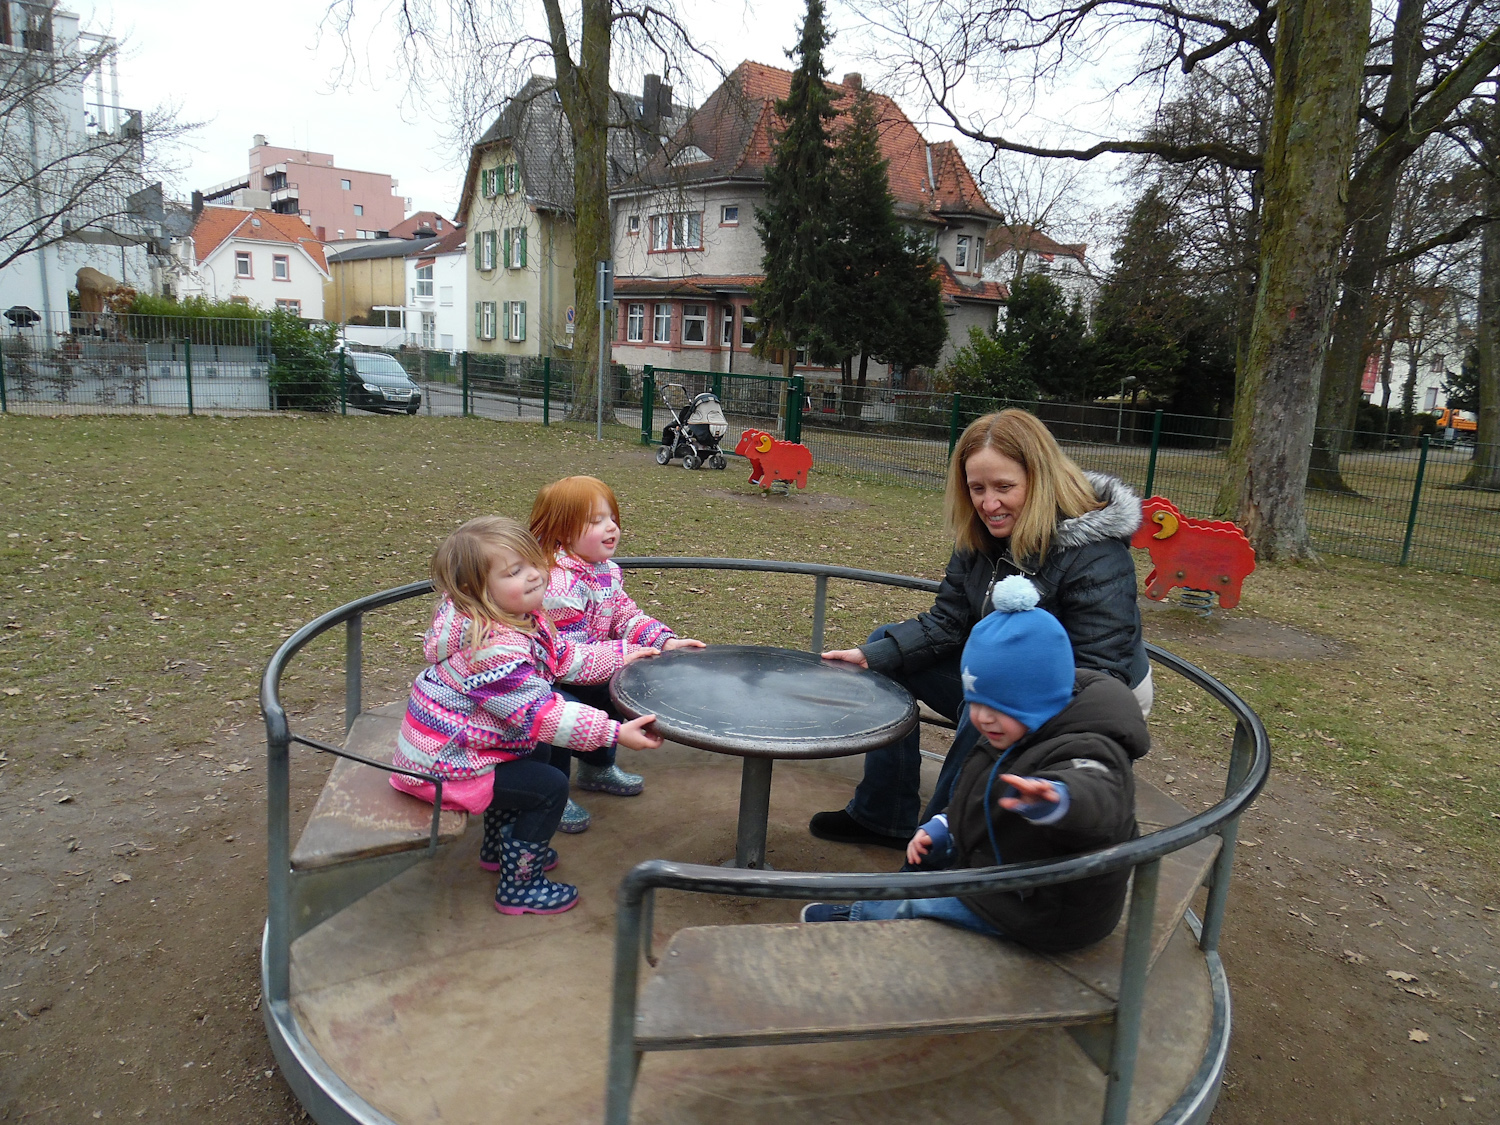 at the park in Oberursel